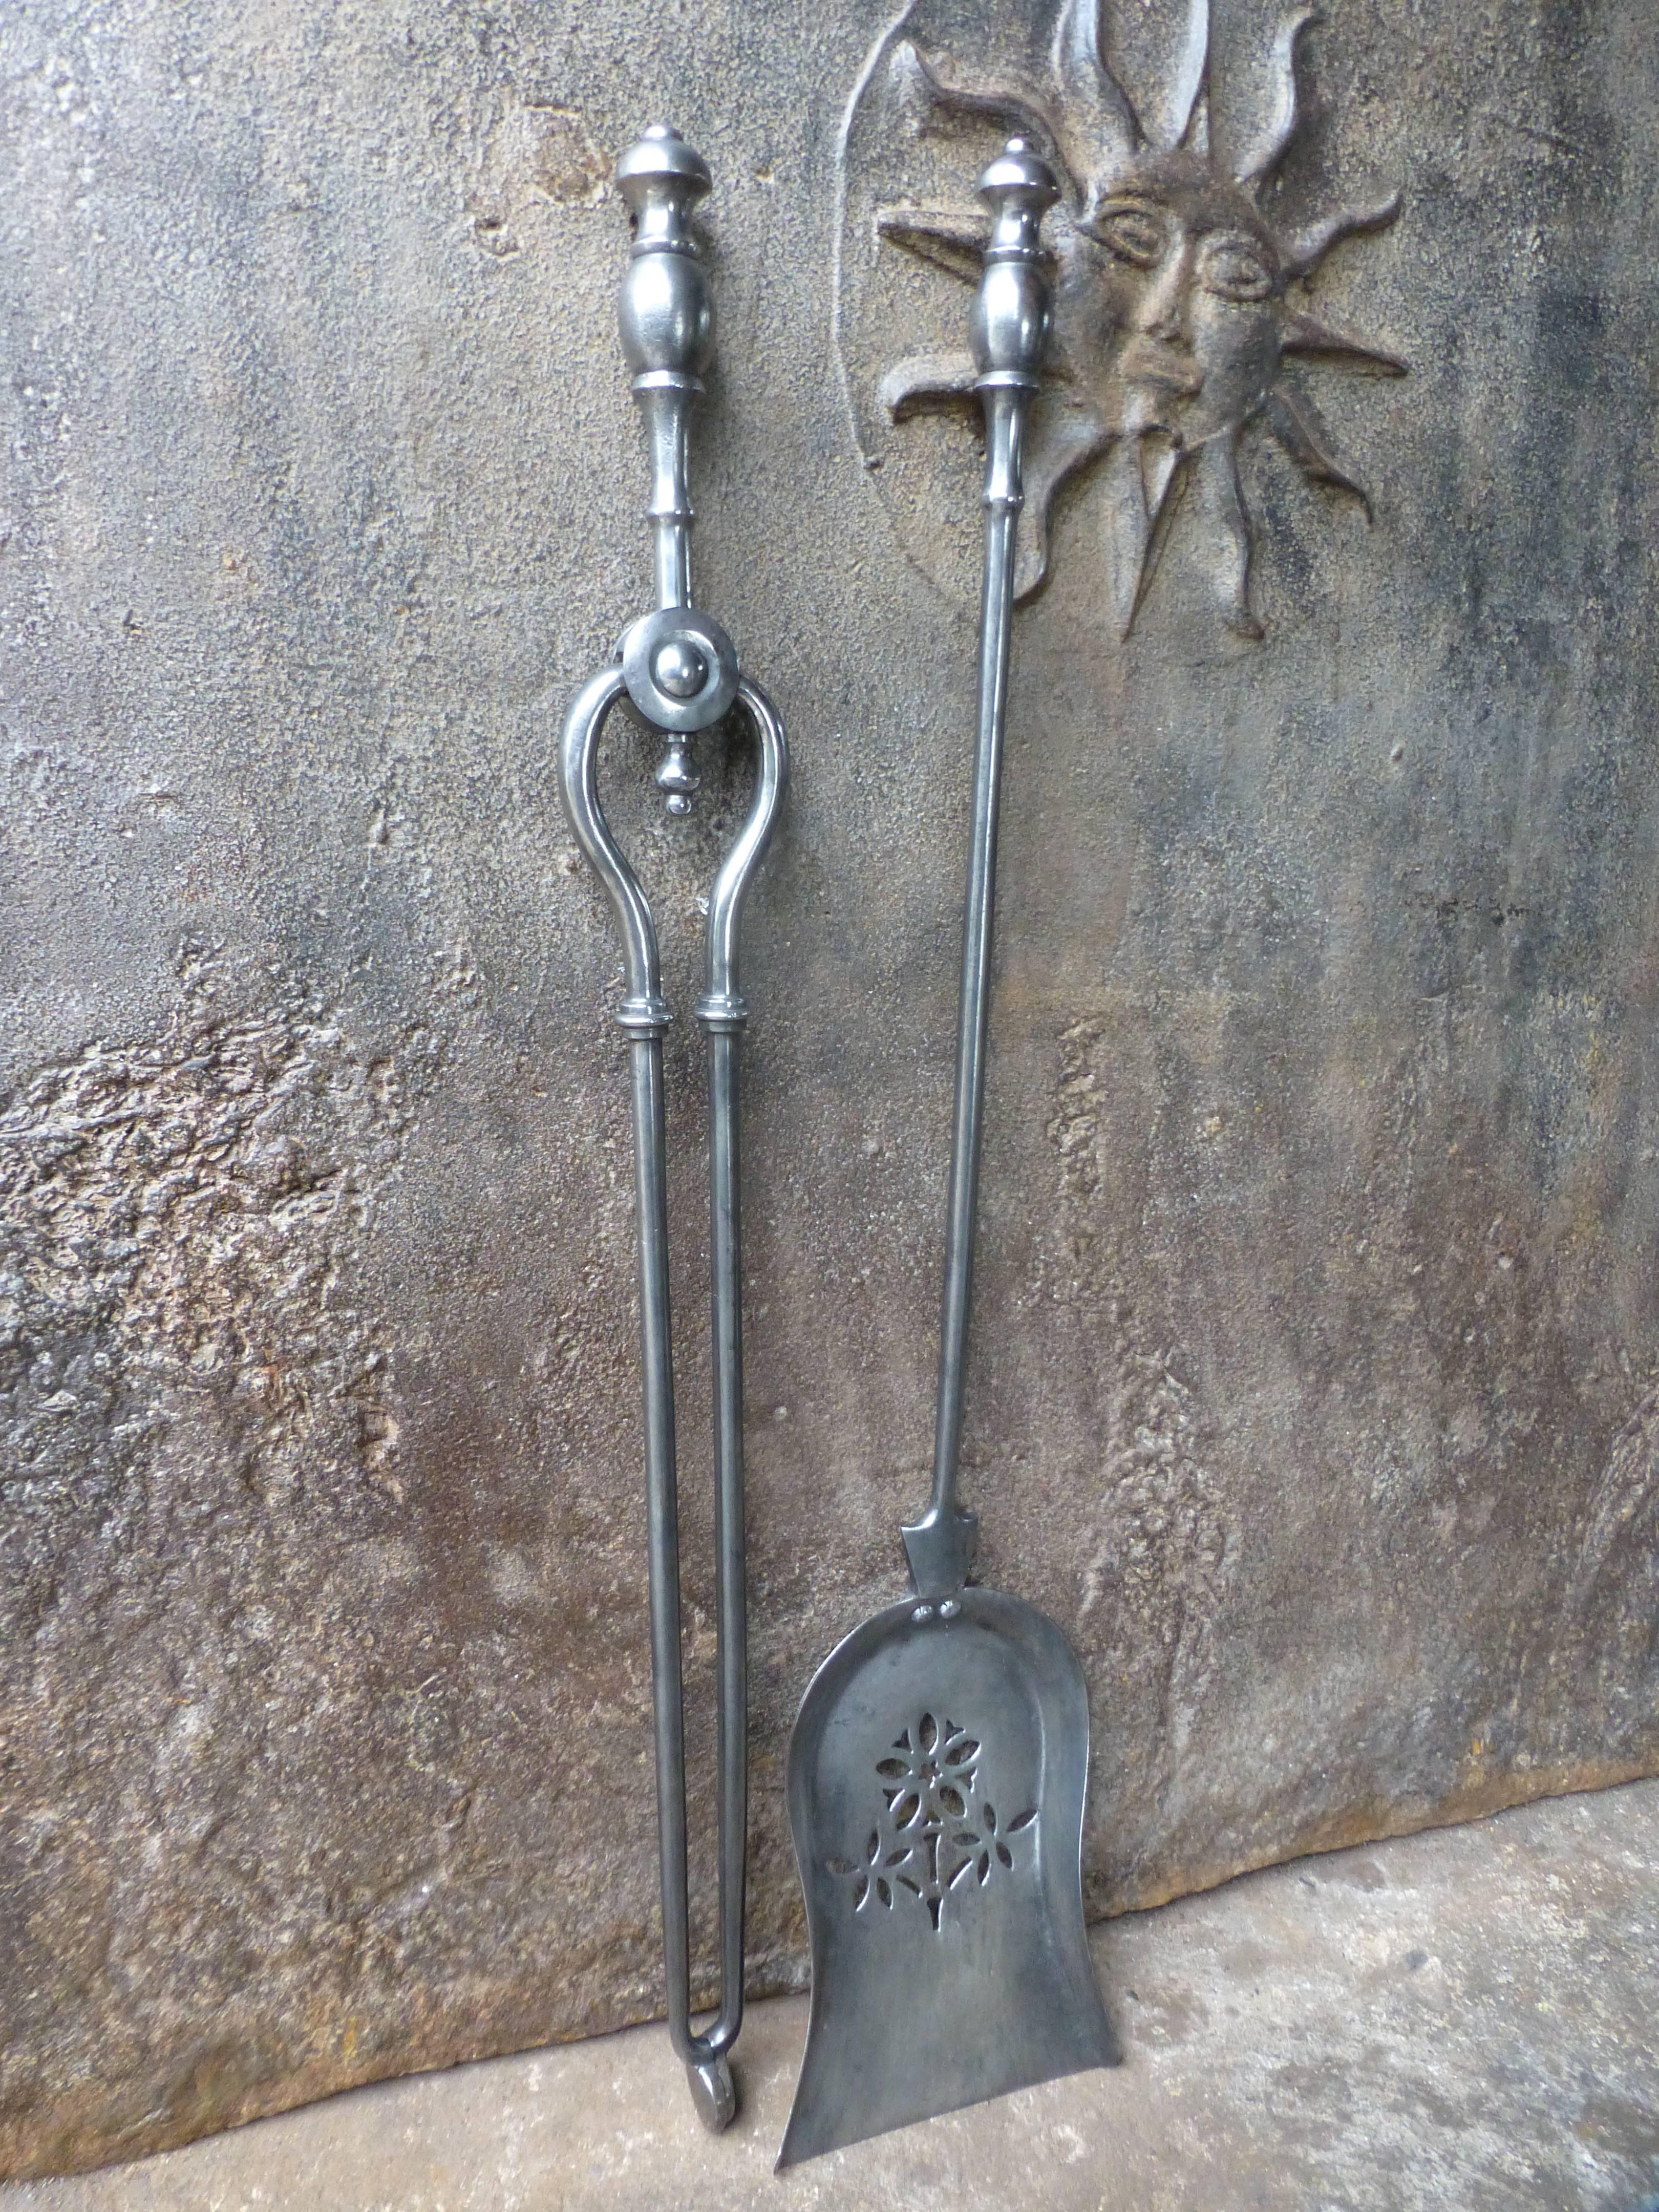 19th century English fire irons made of polished steel.

 